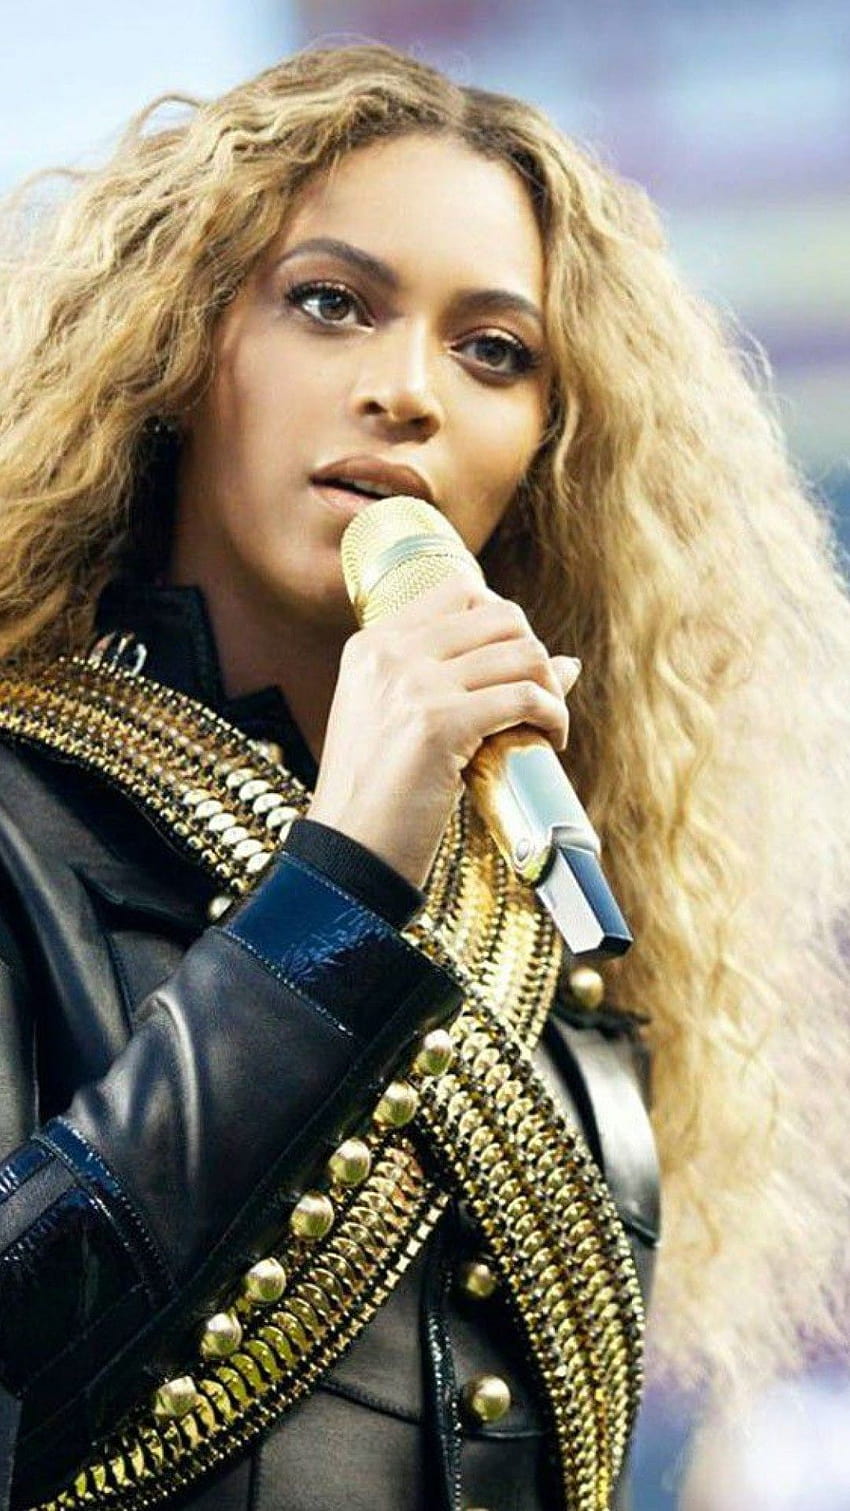 Beyonce posted by Ethan Thompson, beyonce iphone HD phone wallpaper